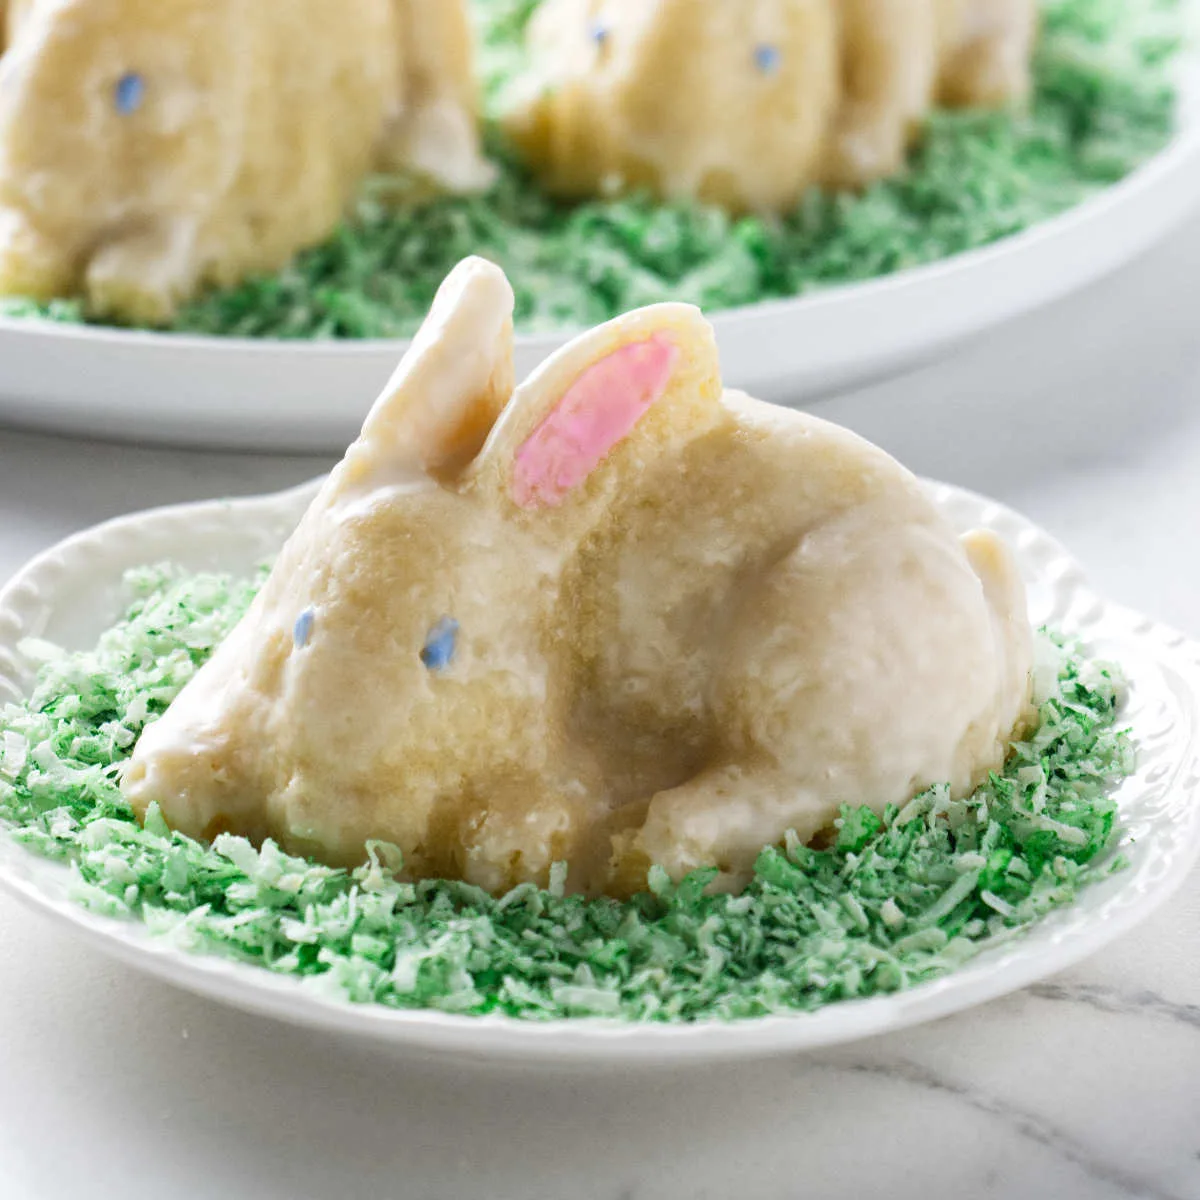 A small easter bunny cake on a plate.